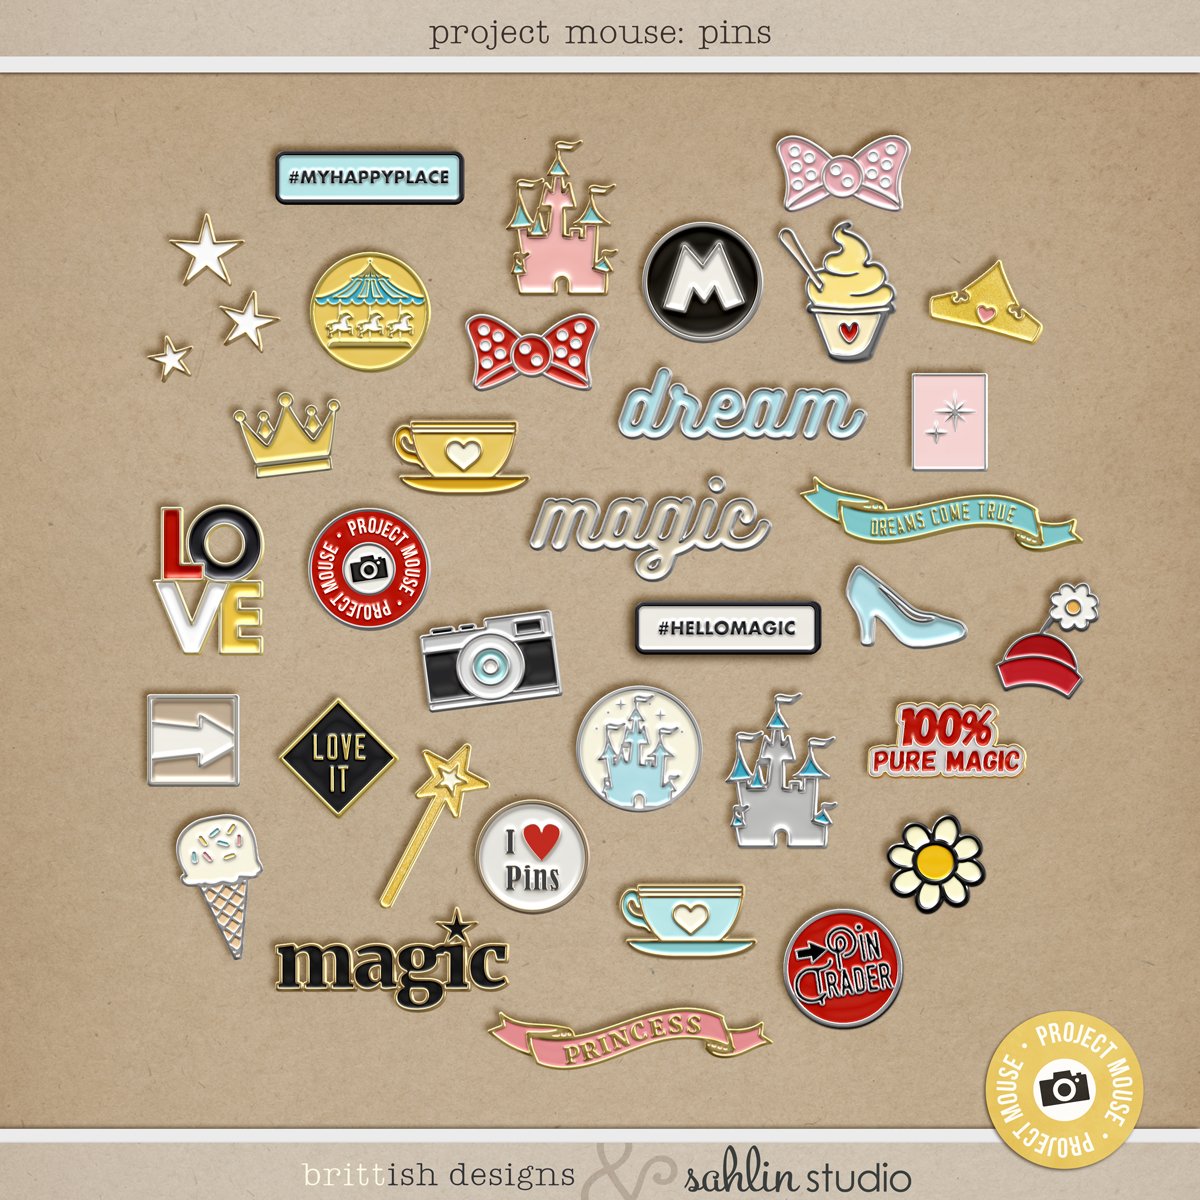 Project Mouse: Pins